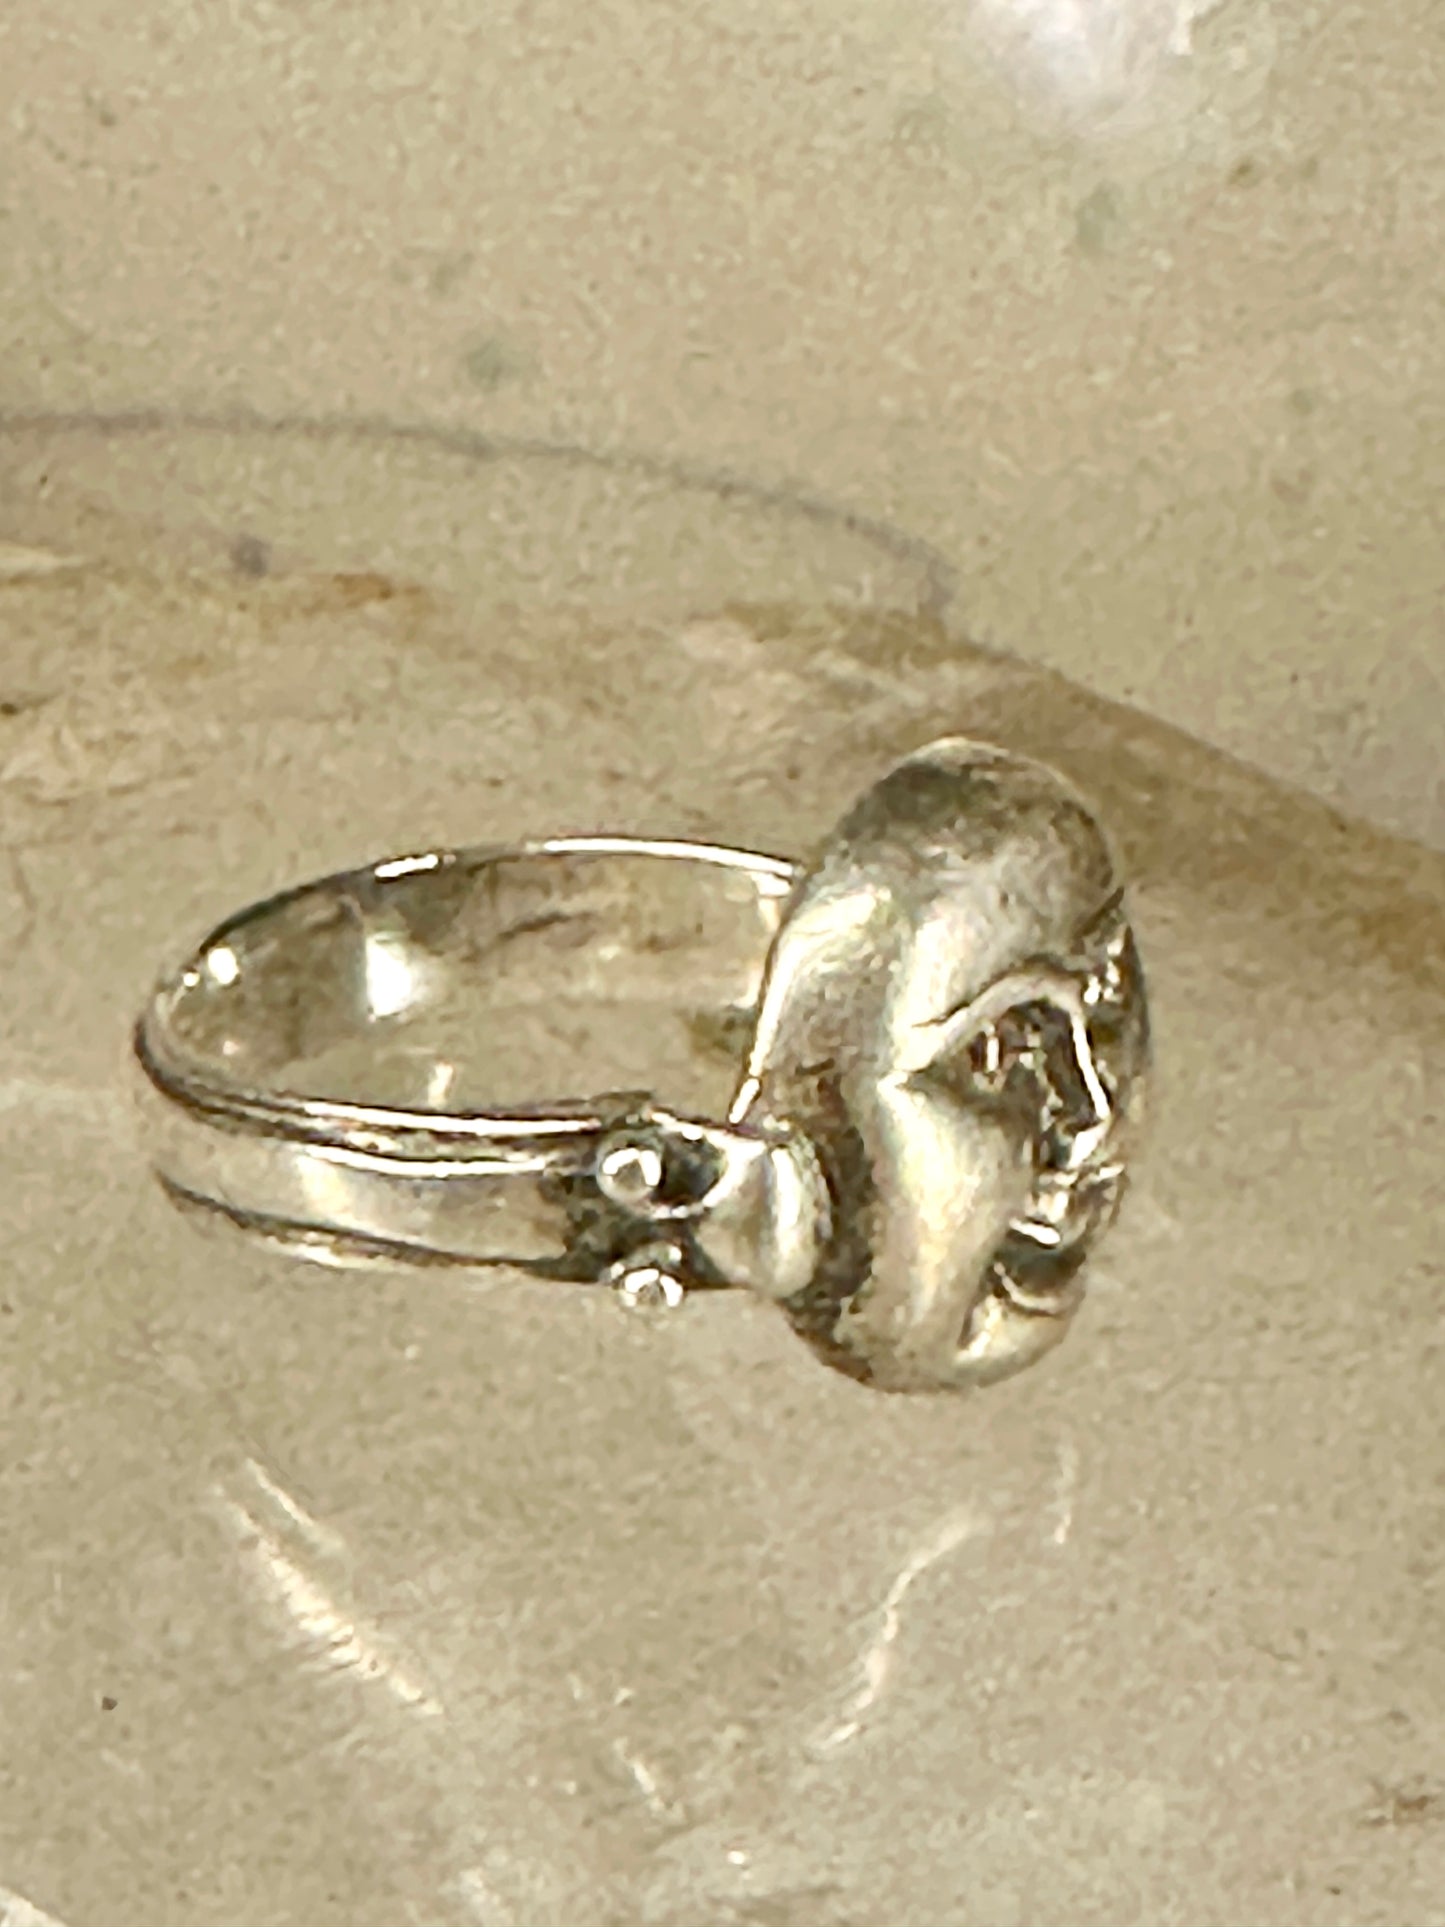 Moon ring size 5 celestial band  sterling silver women girls